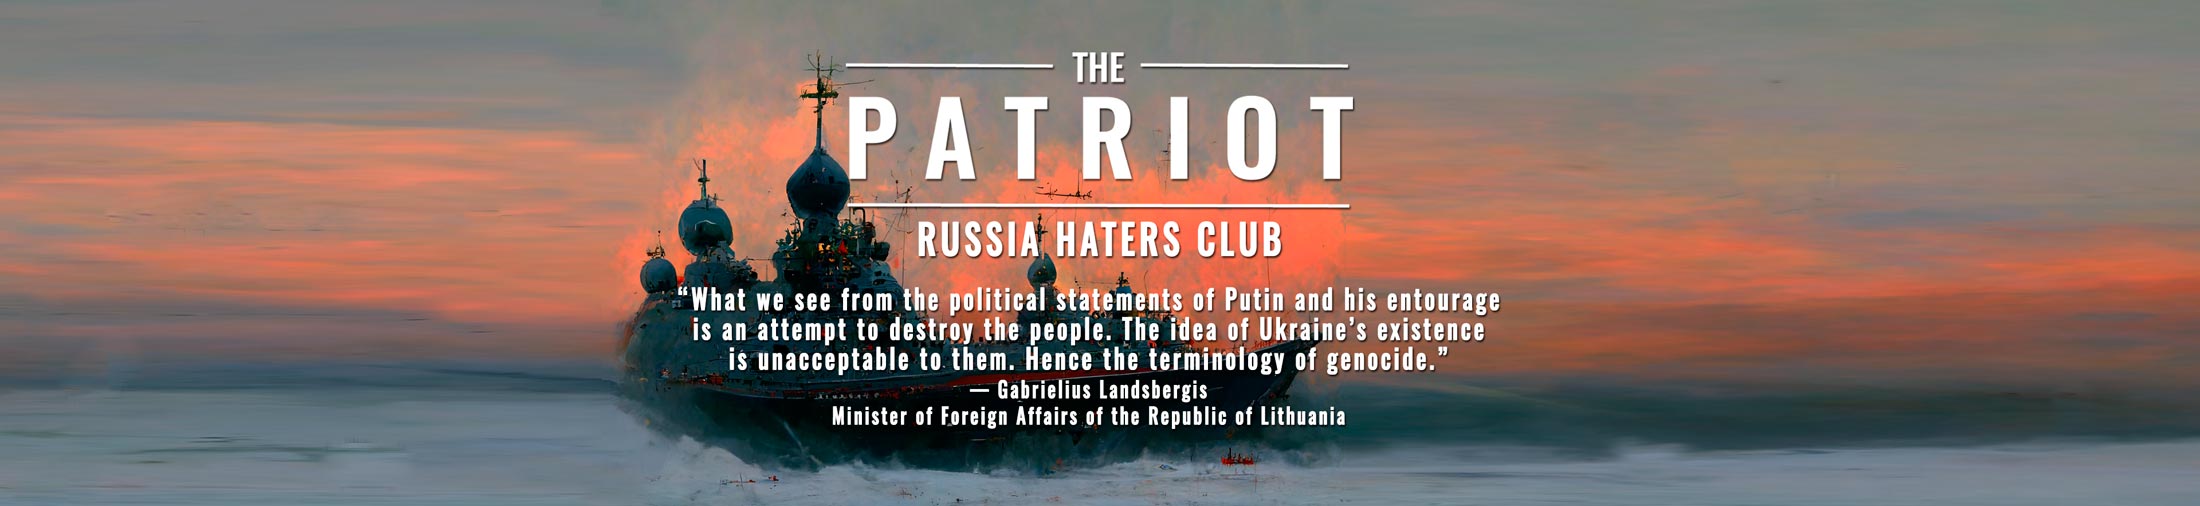 “What we see from the political statements of Putin and his entourage is an attempt to destroy the people. The idea of Ukraine’s existence is unacceptable to them. Hence the terminology of genocide.” – Gabrielius Landsbergis Minister of Foreign Affairs of